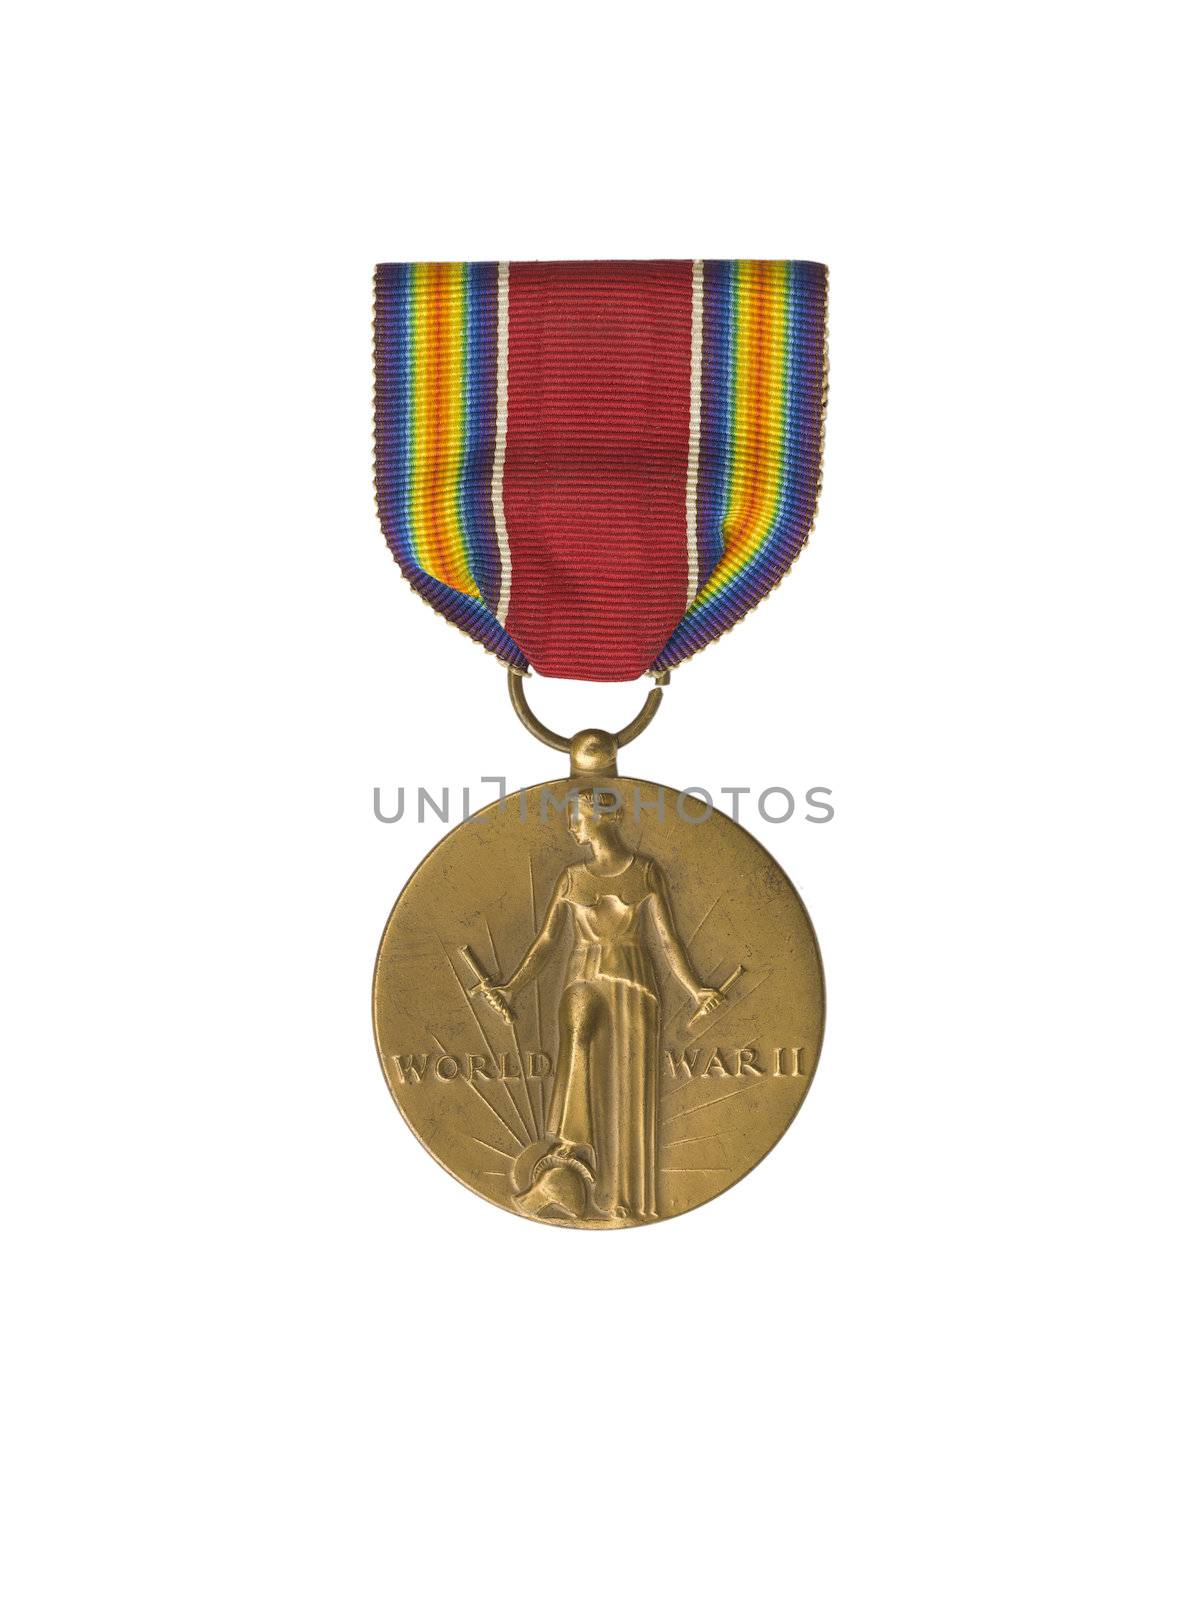 Image of a bronze world war 2 medal isolated on white background.